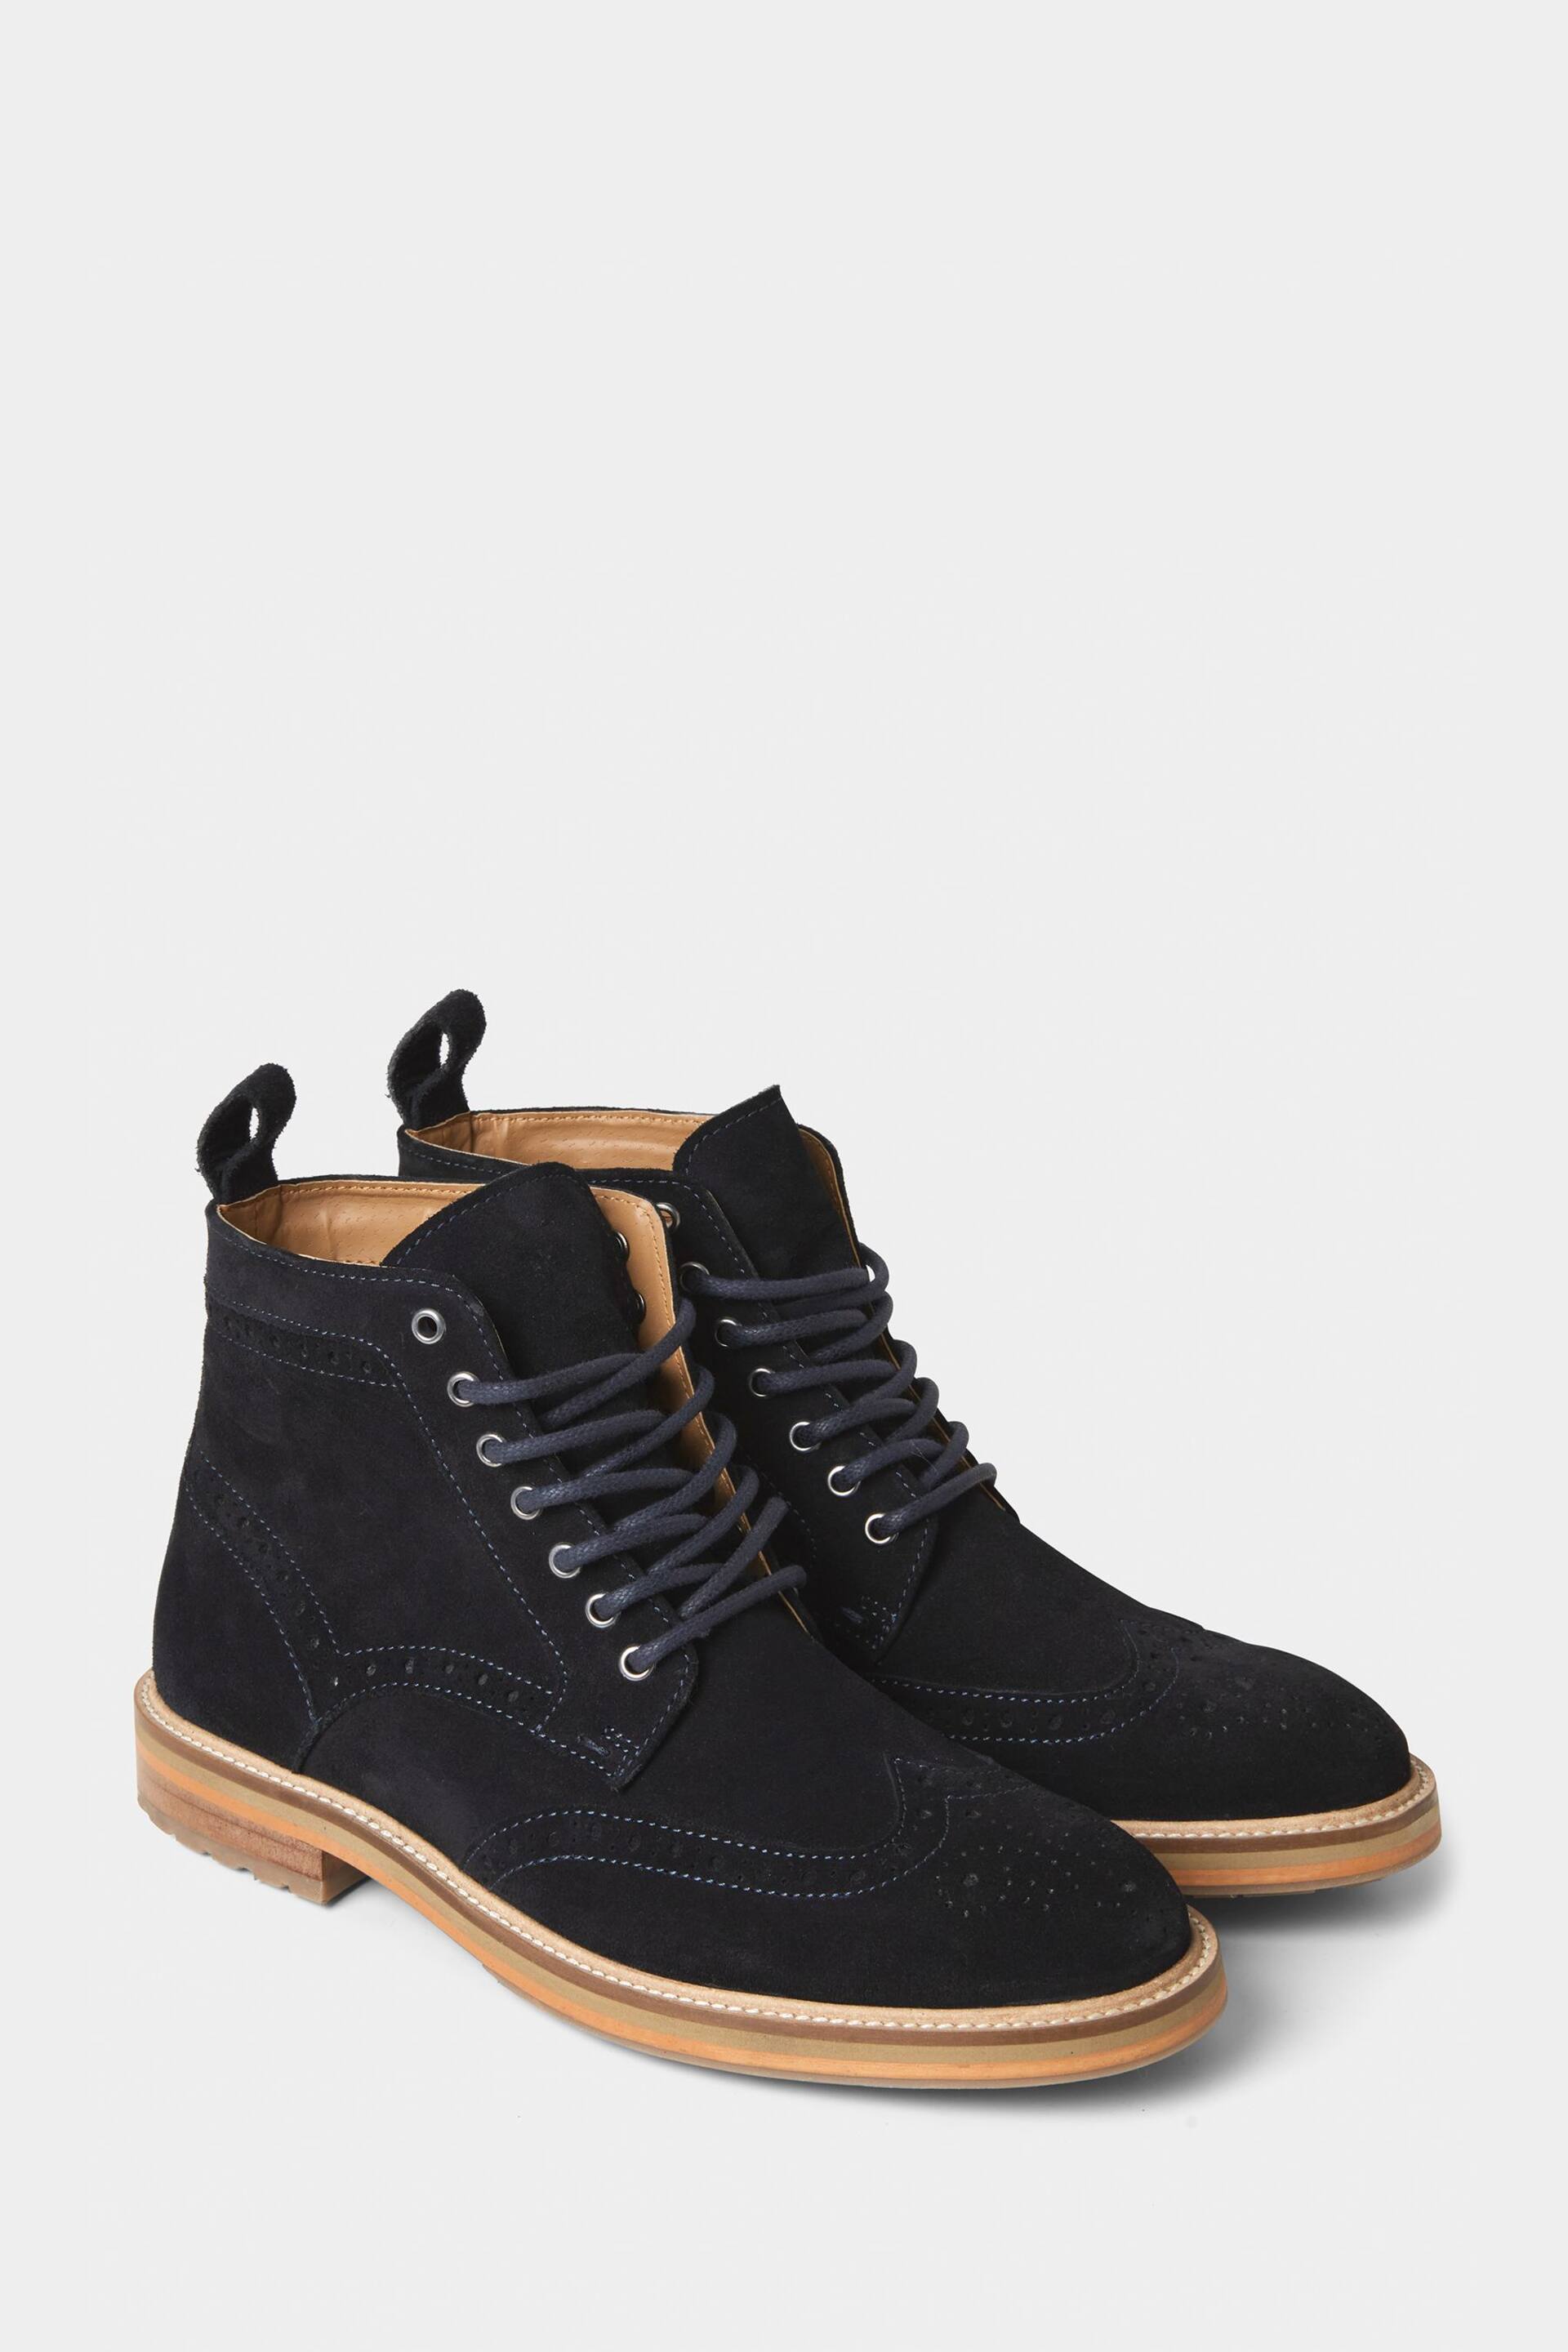 Joe Browns Blue Leith Walk Suede Boots - Image 3 of 5